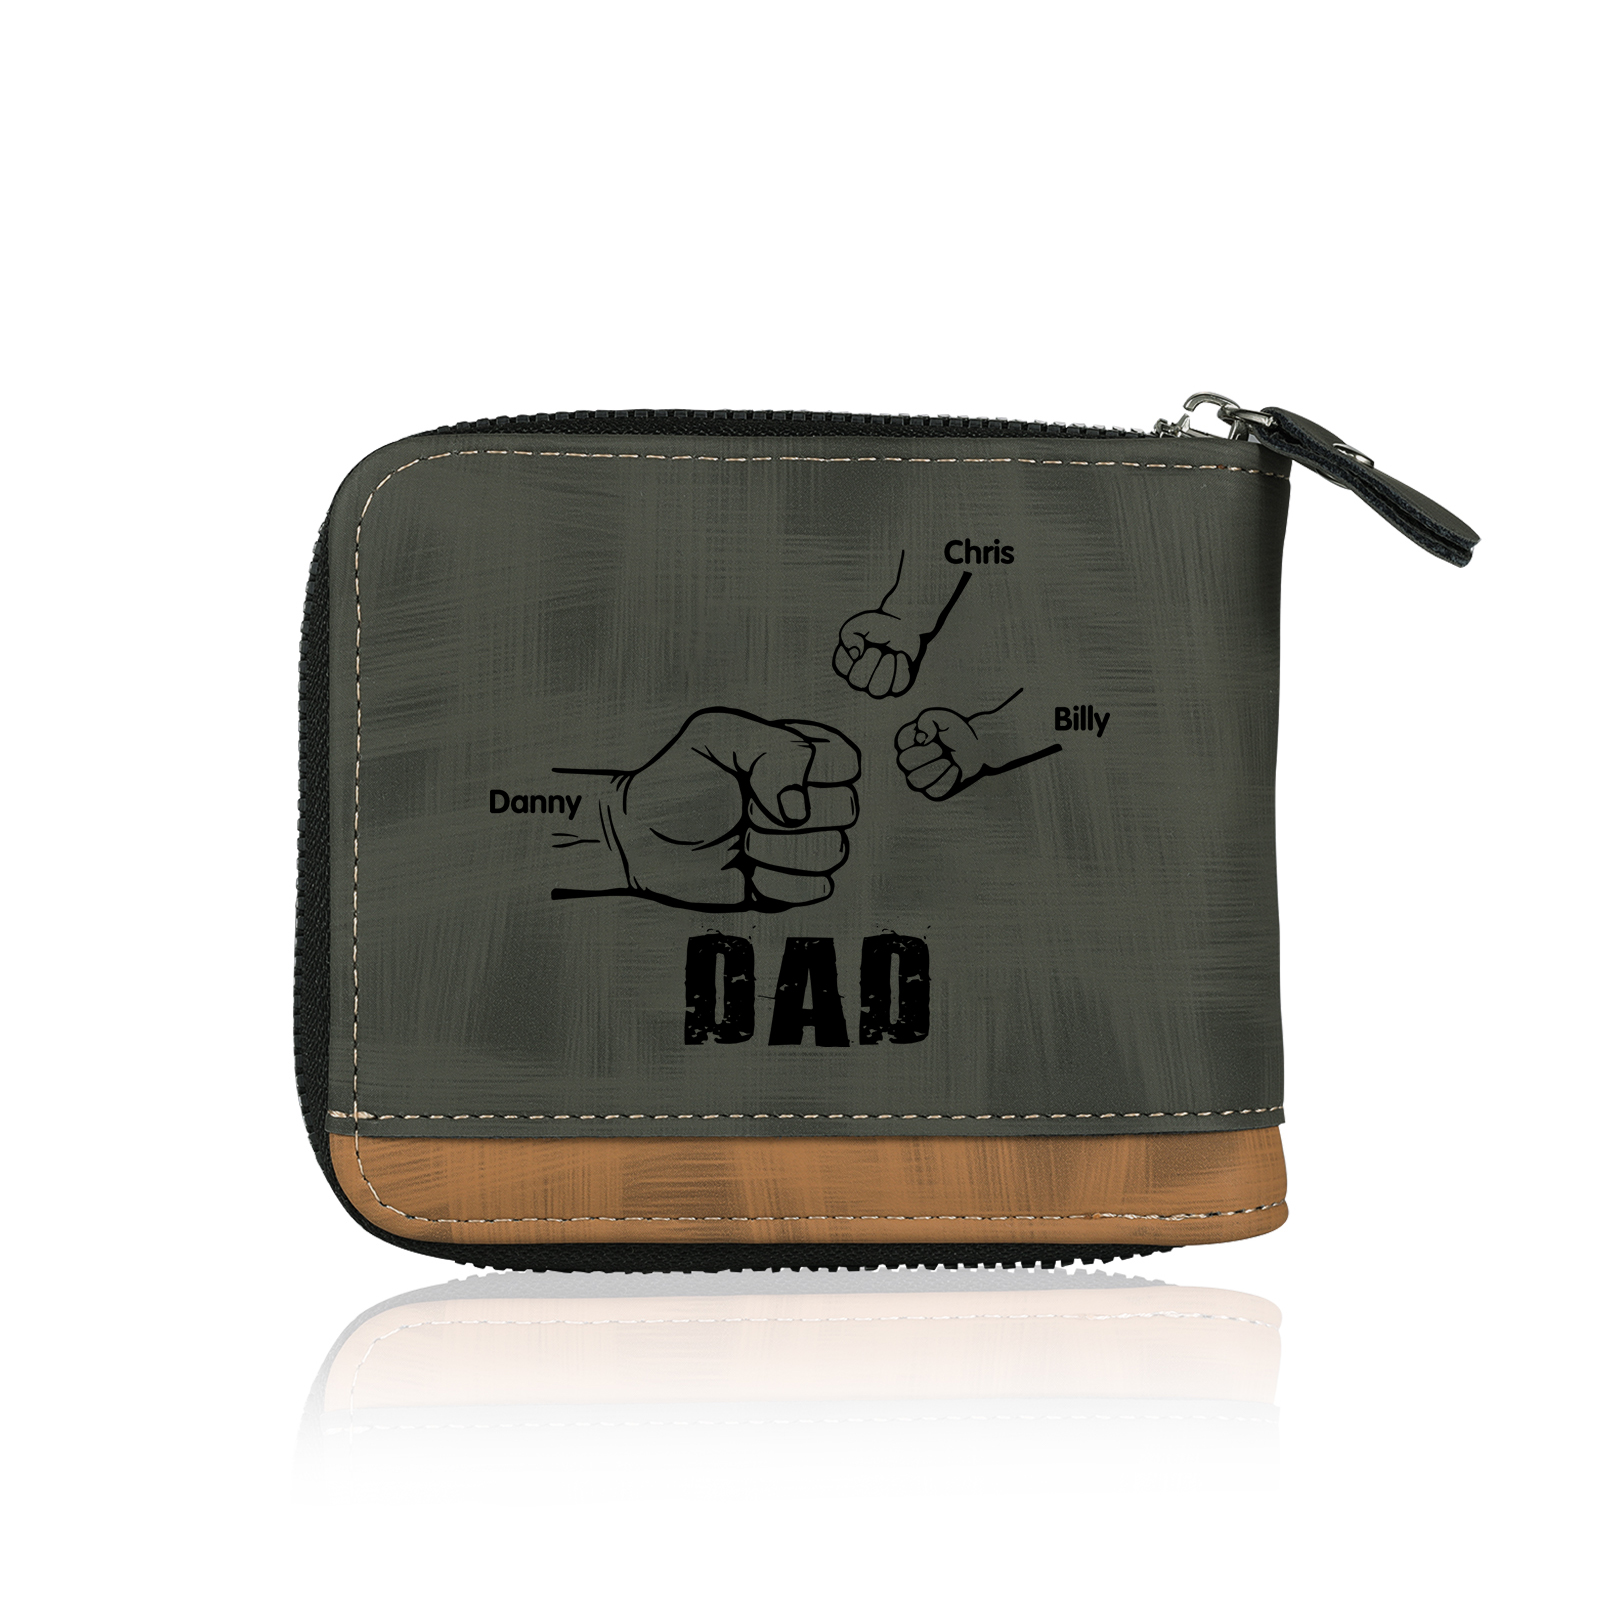 3 Names - Personalized Photo Custom Leather Men's Zipper Wallet as a Father's Day Gift for Dad